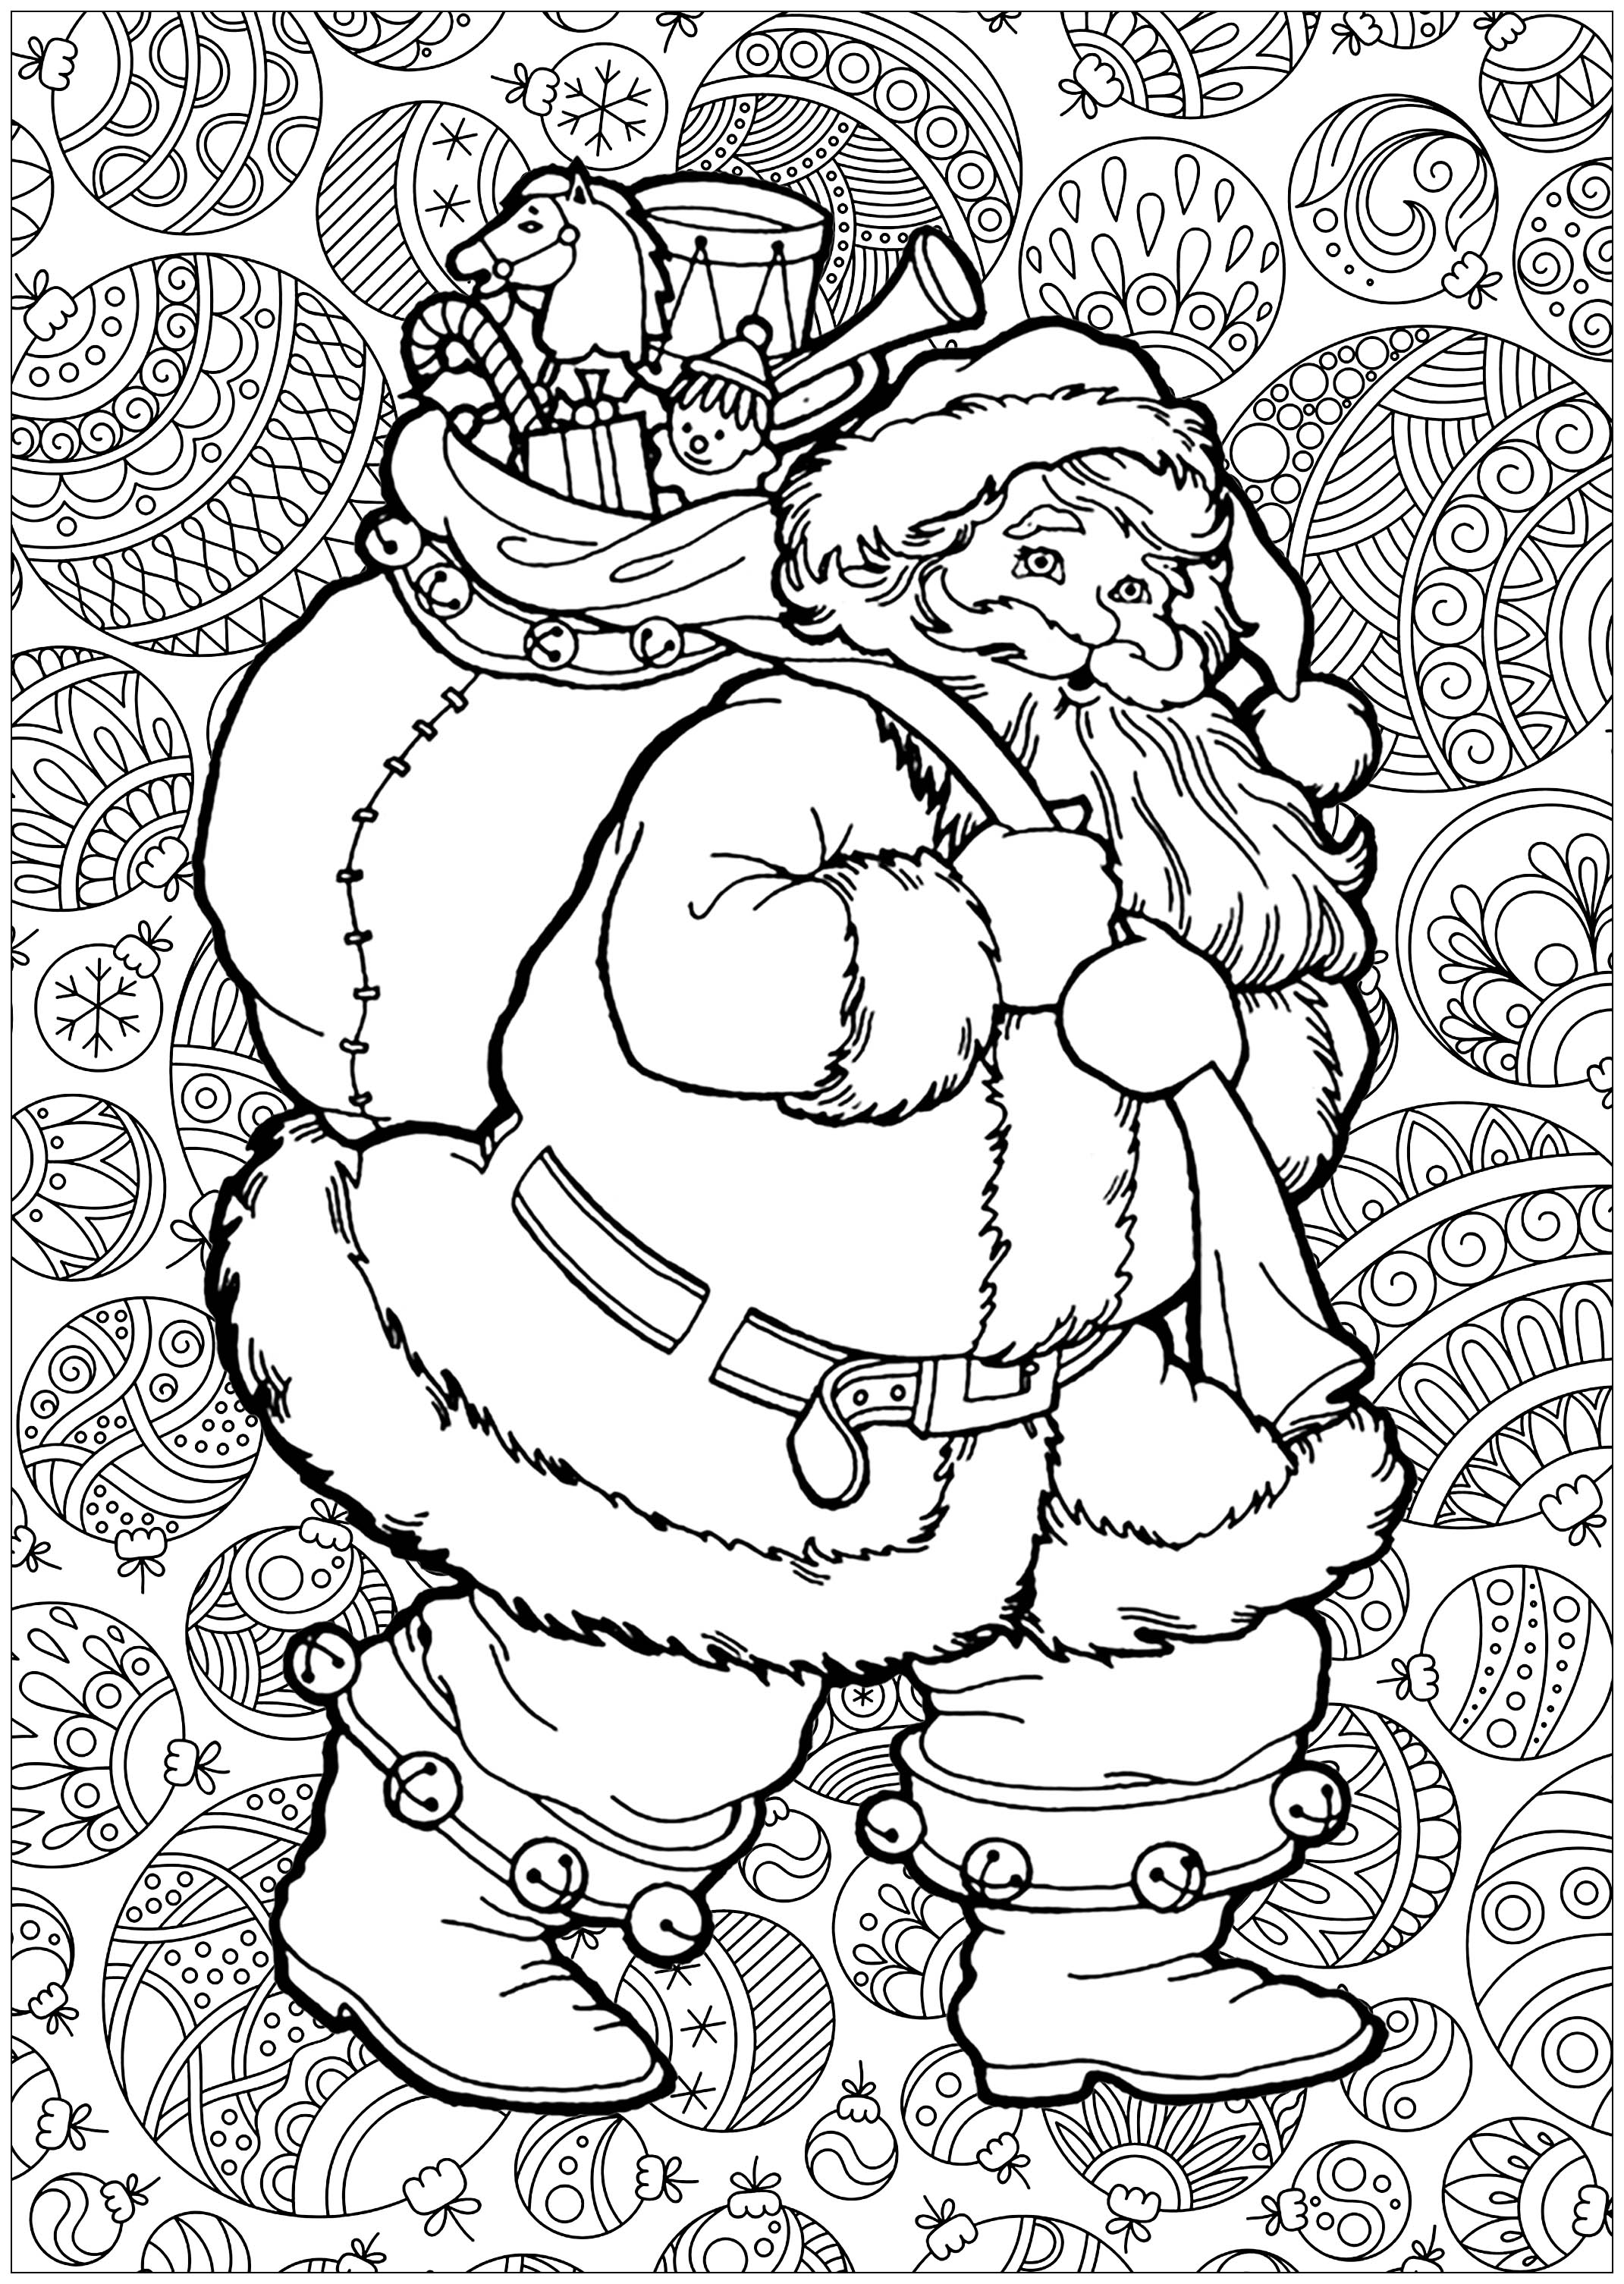 Coloring Pages Santa Santa Claus With Background Christmas Adult Coloring Pages